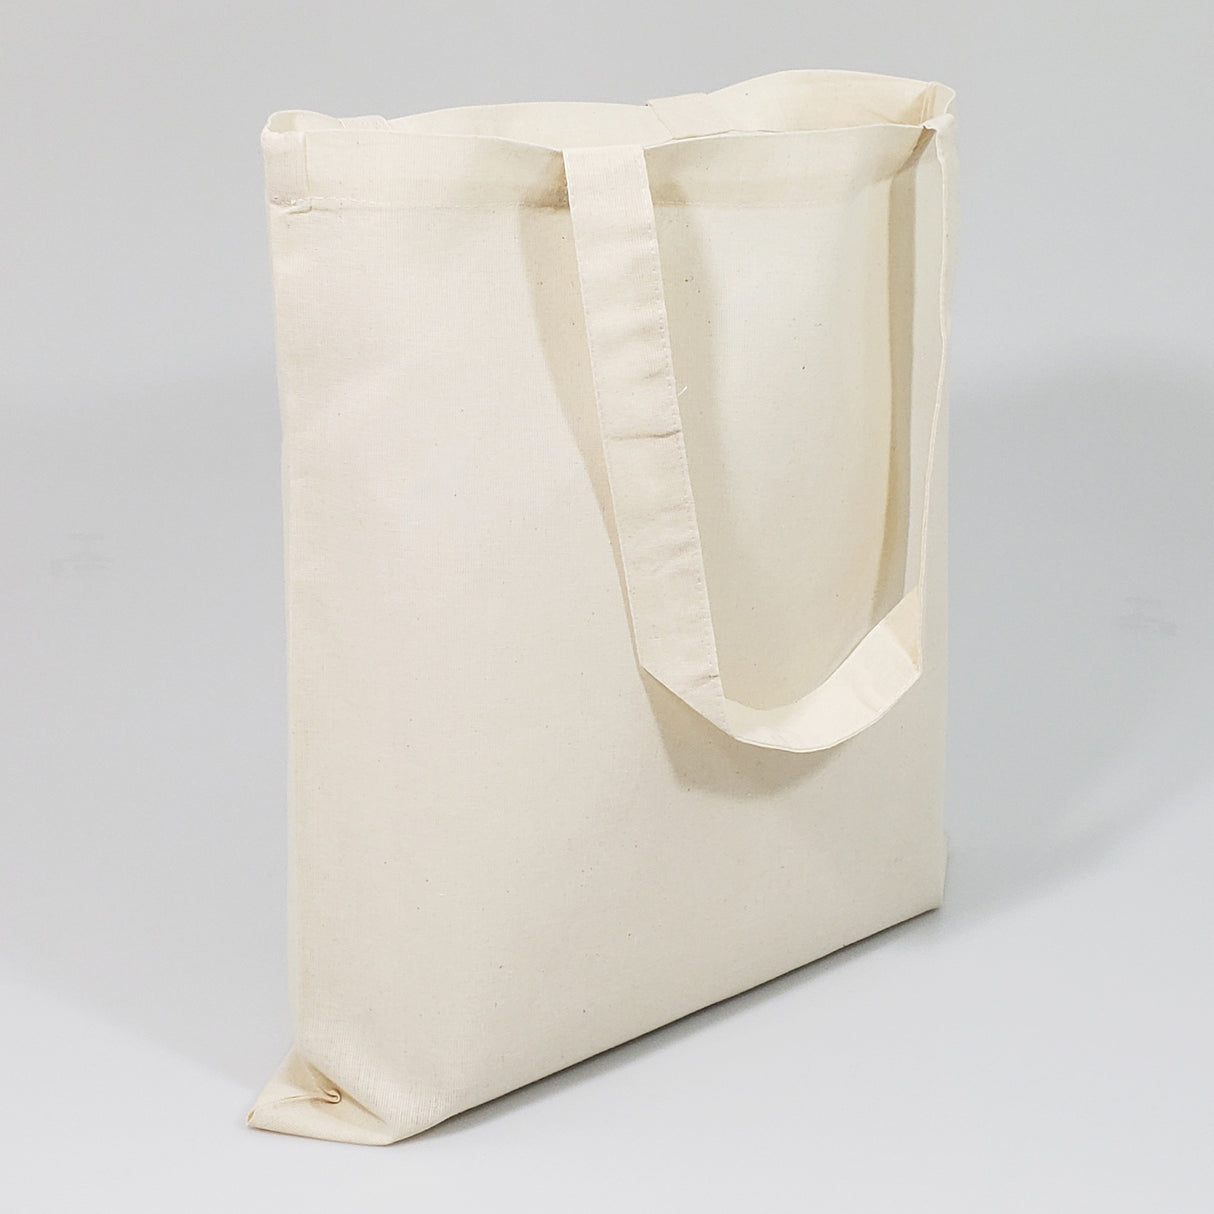 240 ct Natural 100% Cotton Tote Bag - By Case